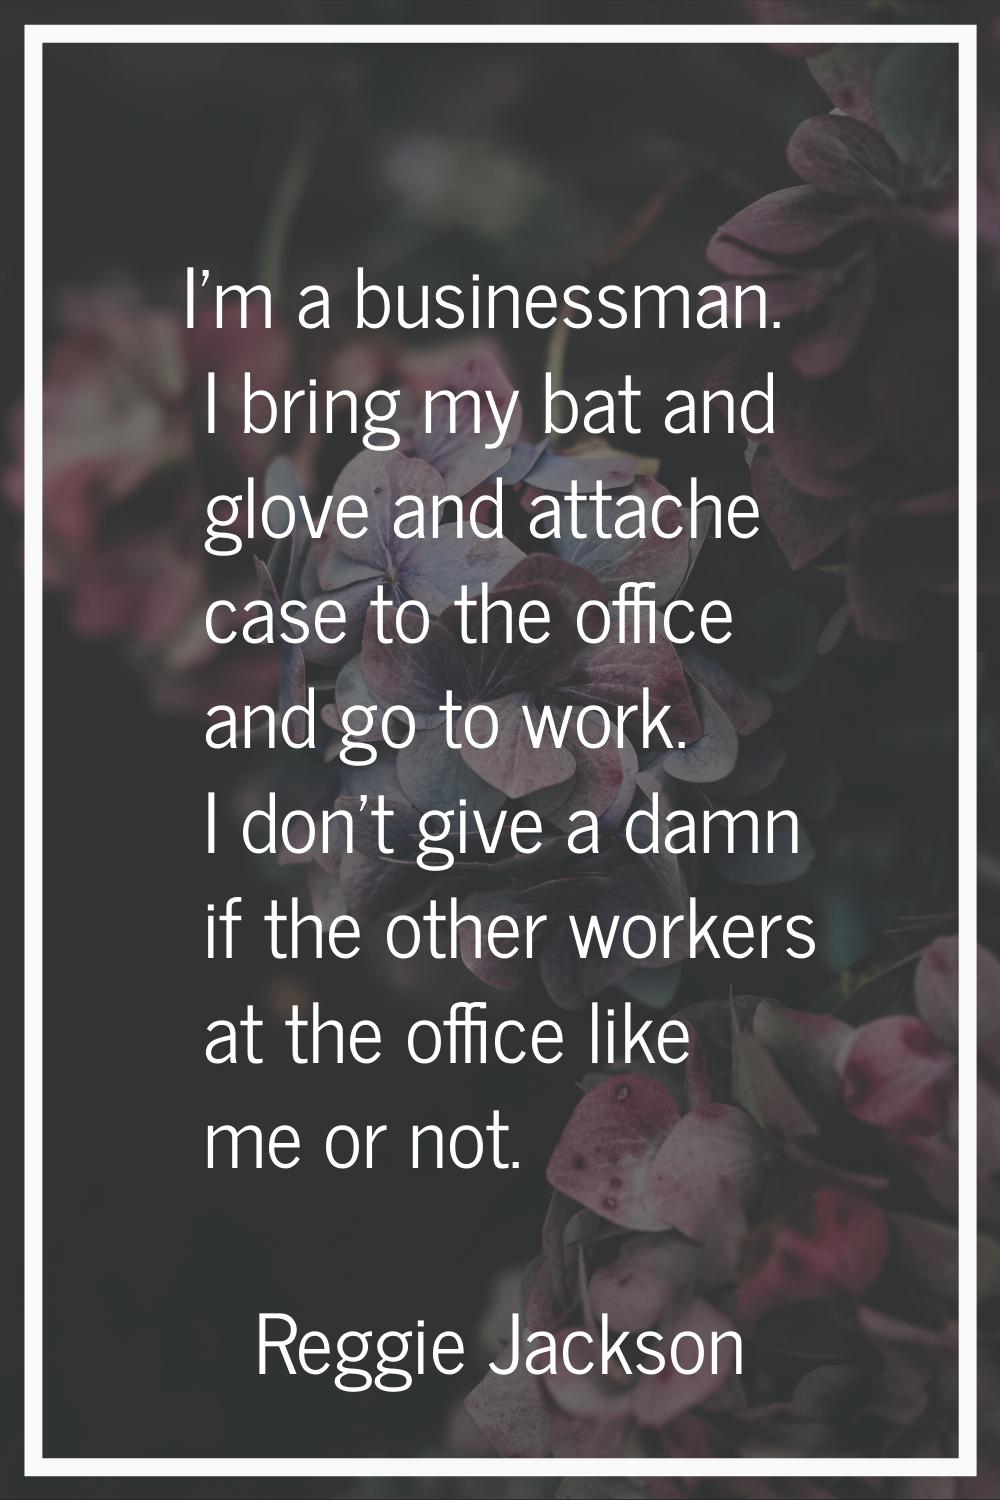 I'm a businessman. I bring my bat and glove and attache case to the office and go to work. I don't 